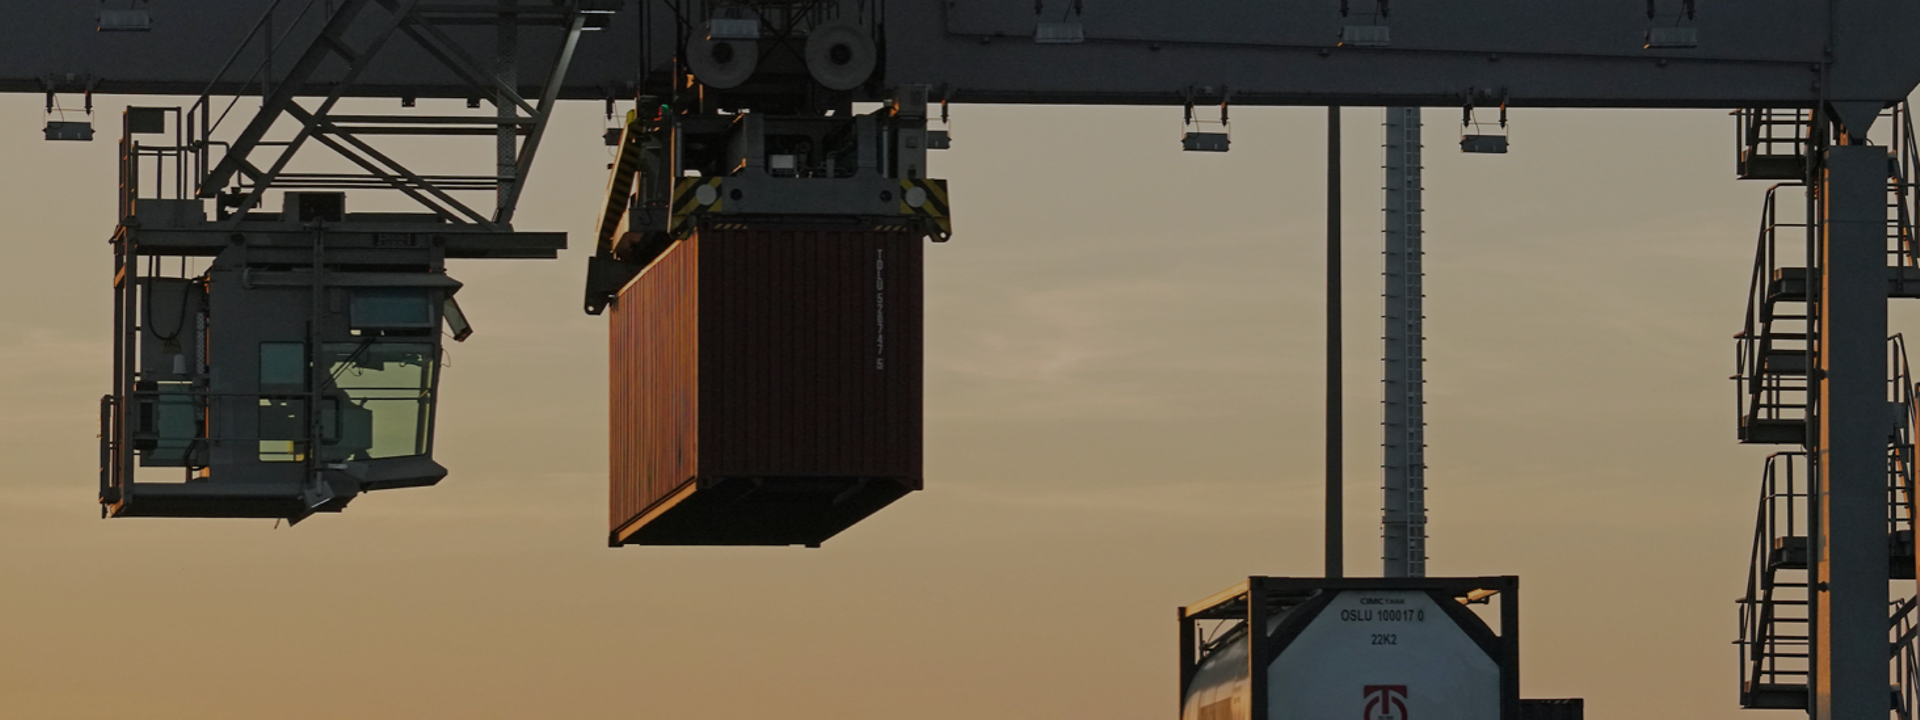 A container hangs on a crane